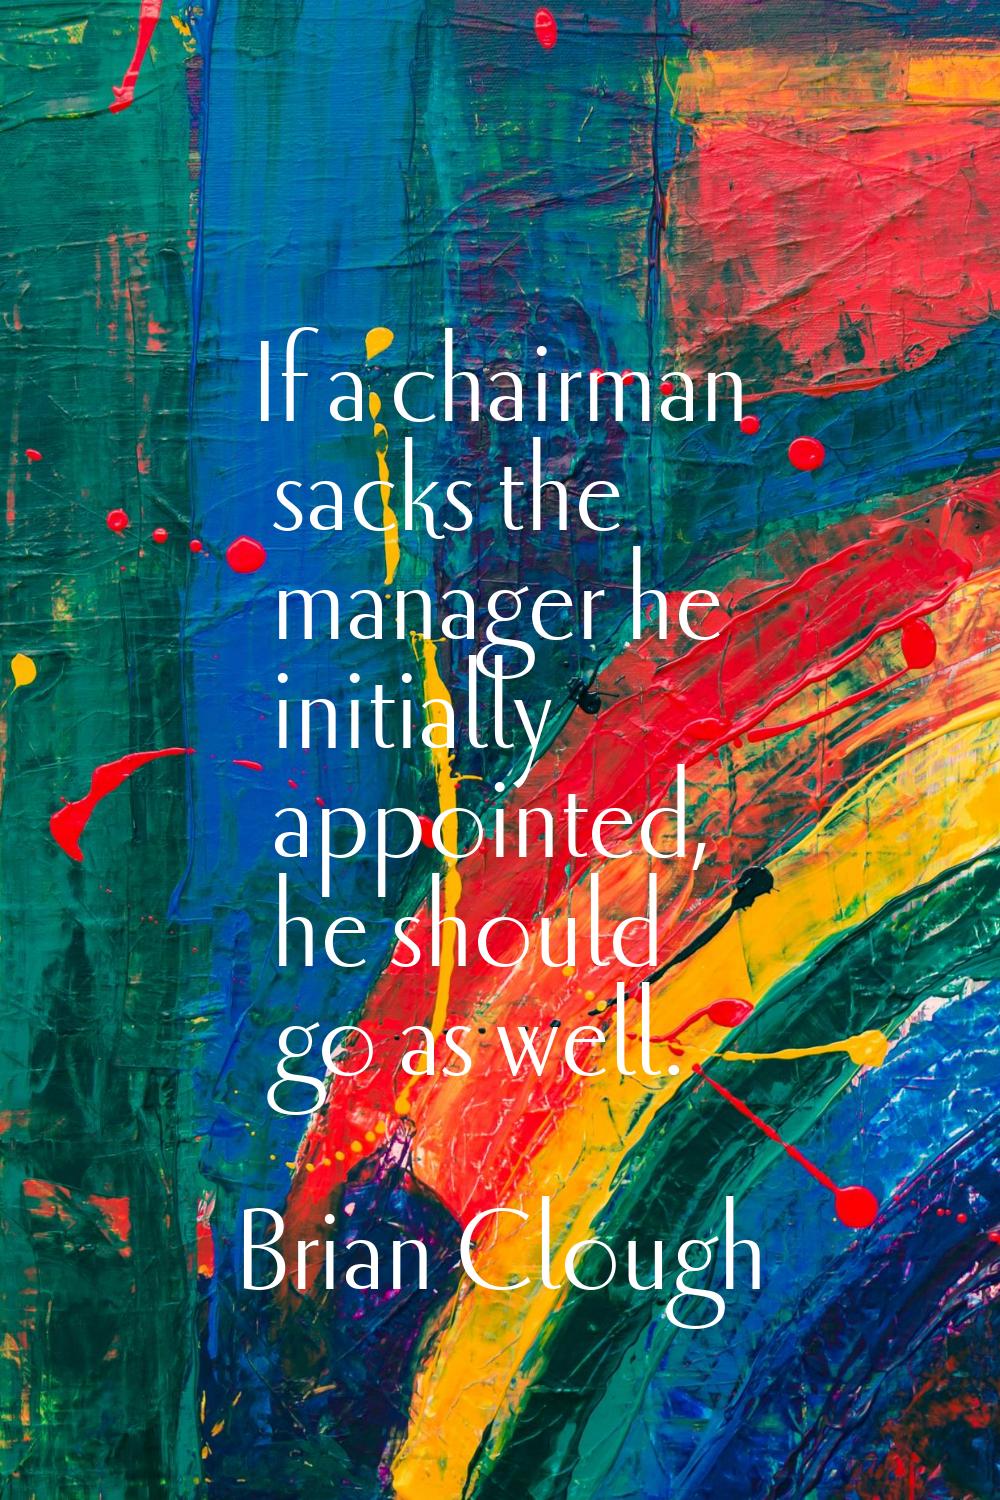 If a chairman sacks the manager he initially appointed, he should go as well.